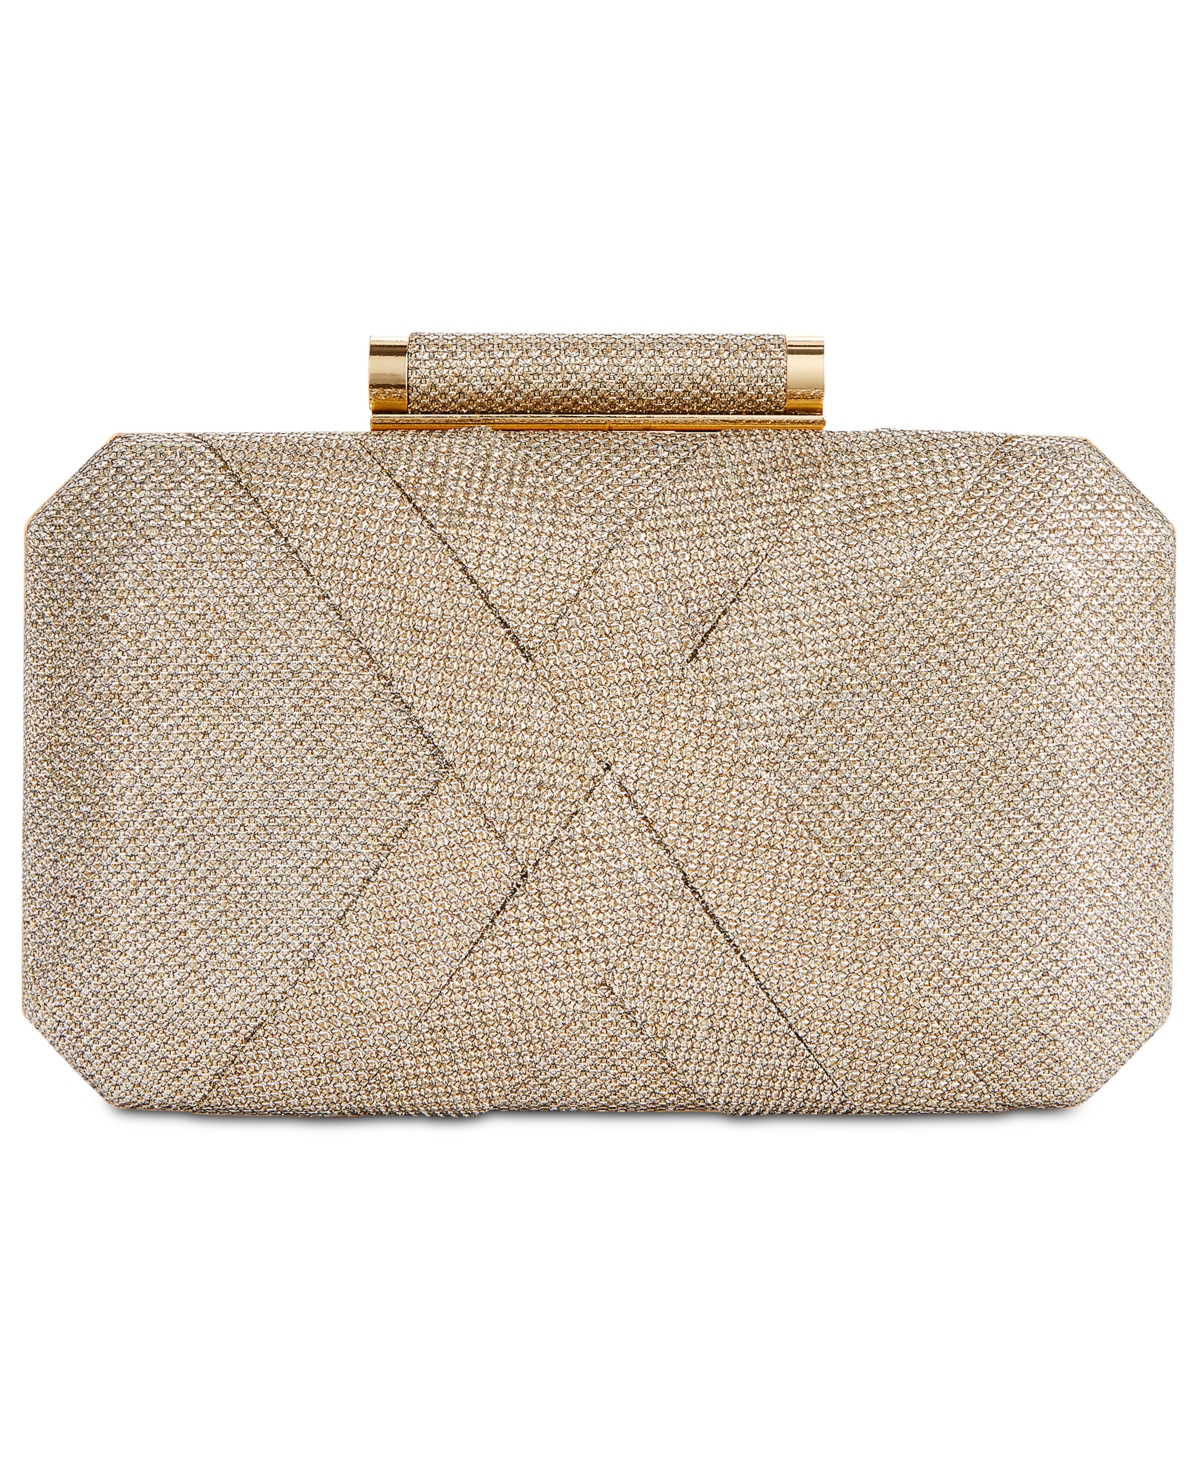 Lindsayy Xx Lurex Clutch, Created for Macy's - Gold/Gold